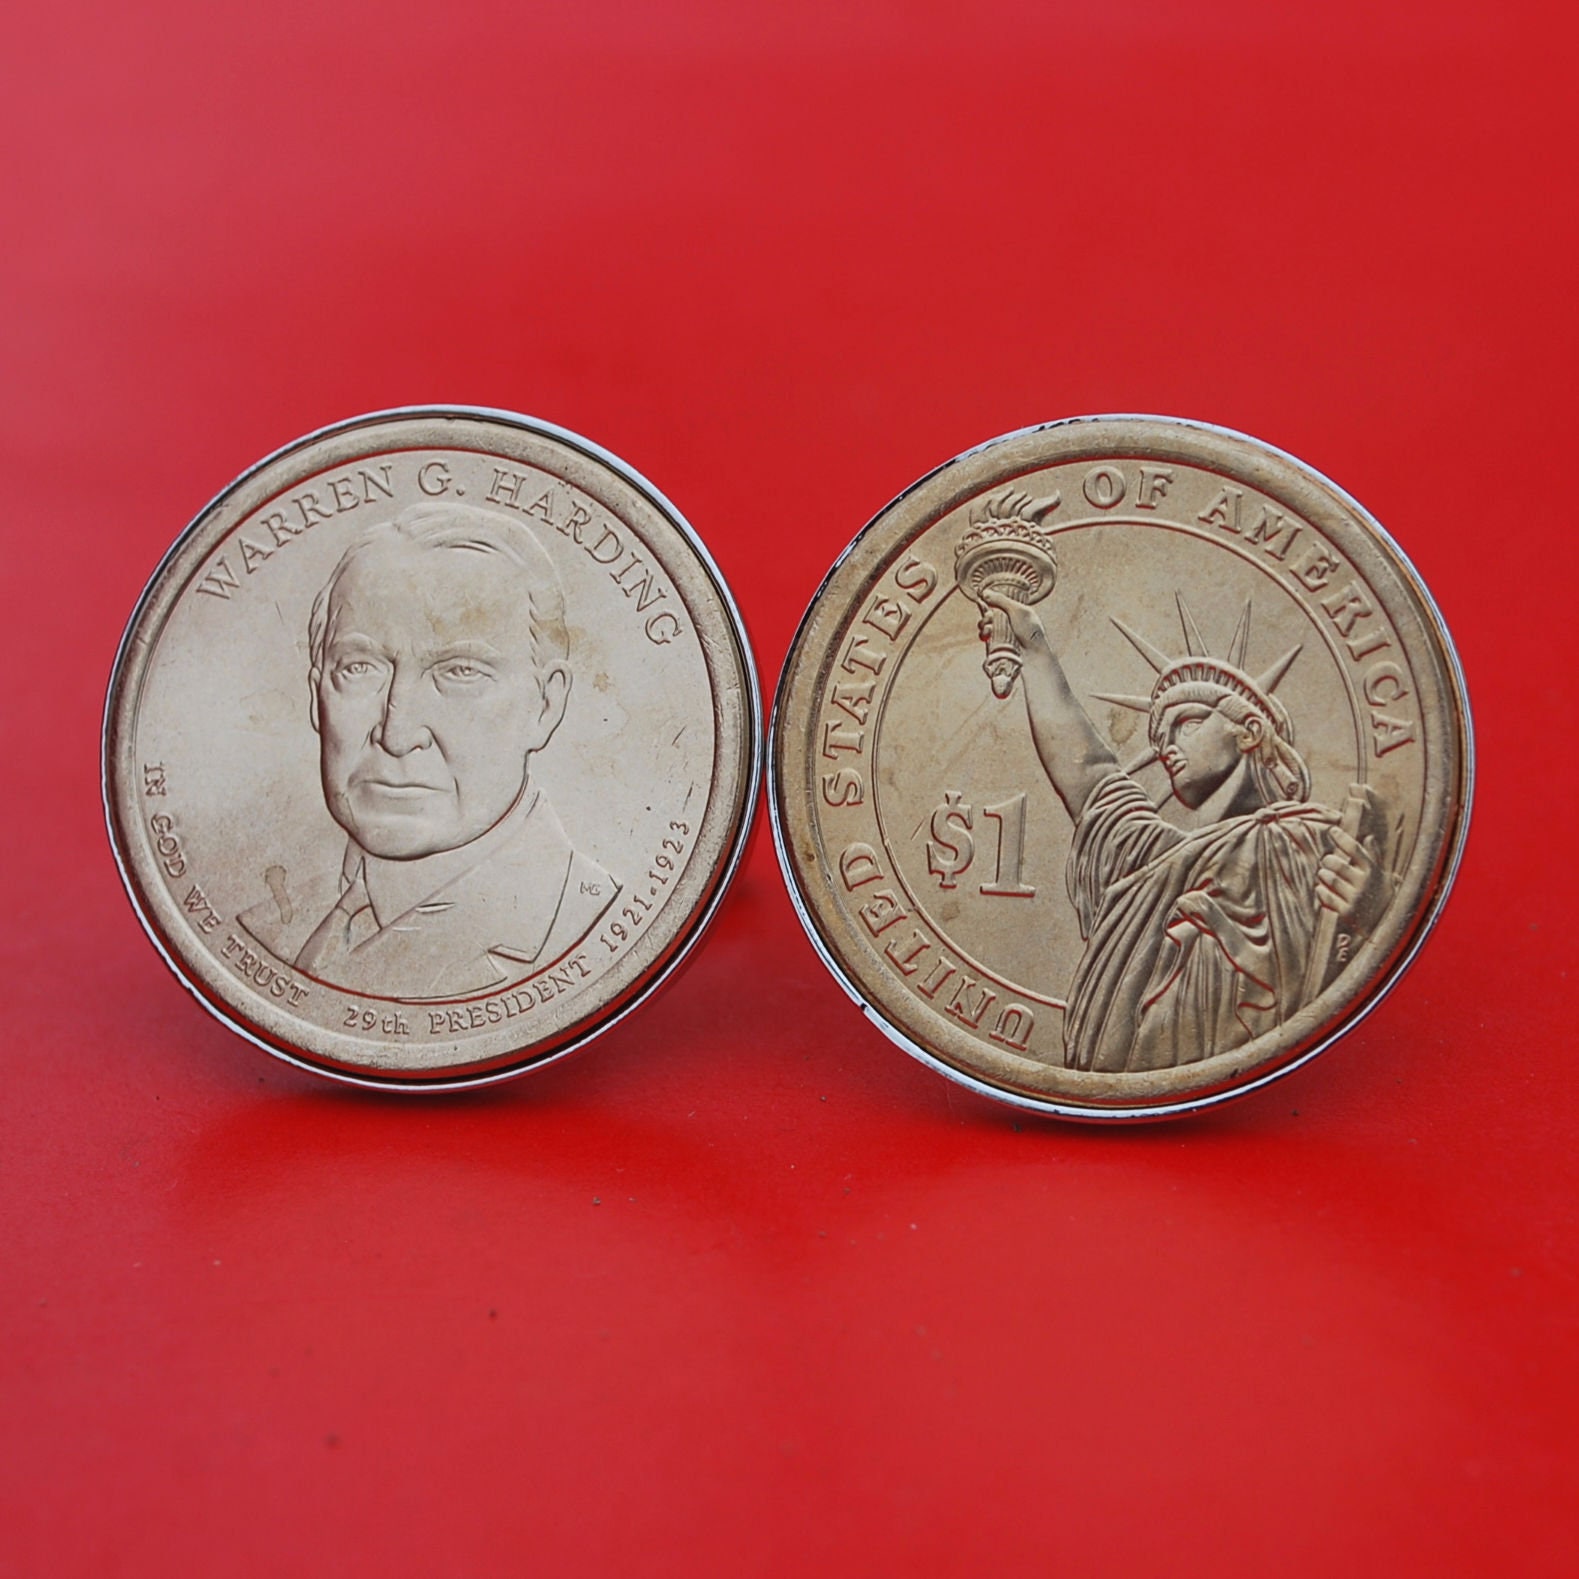 Harding 1921-1923 Years Served Warren G Obverses US 2014 Presidential Dollar BU Uncirculated Coin Silver Plated Cufflinks NEW